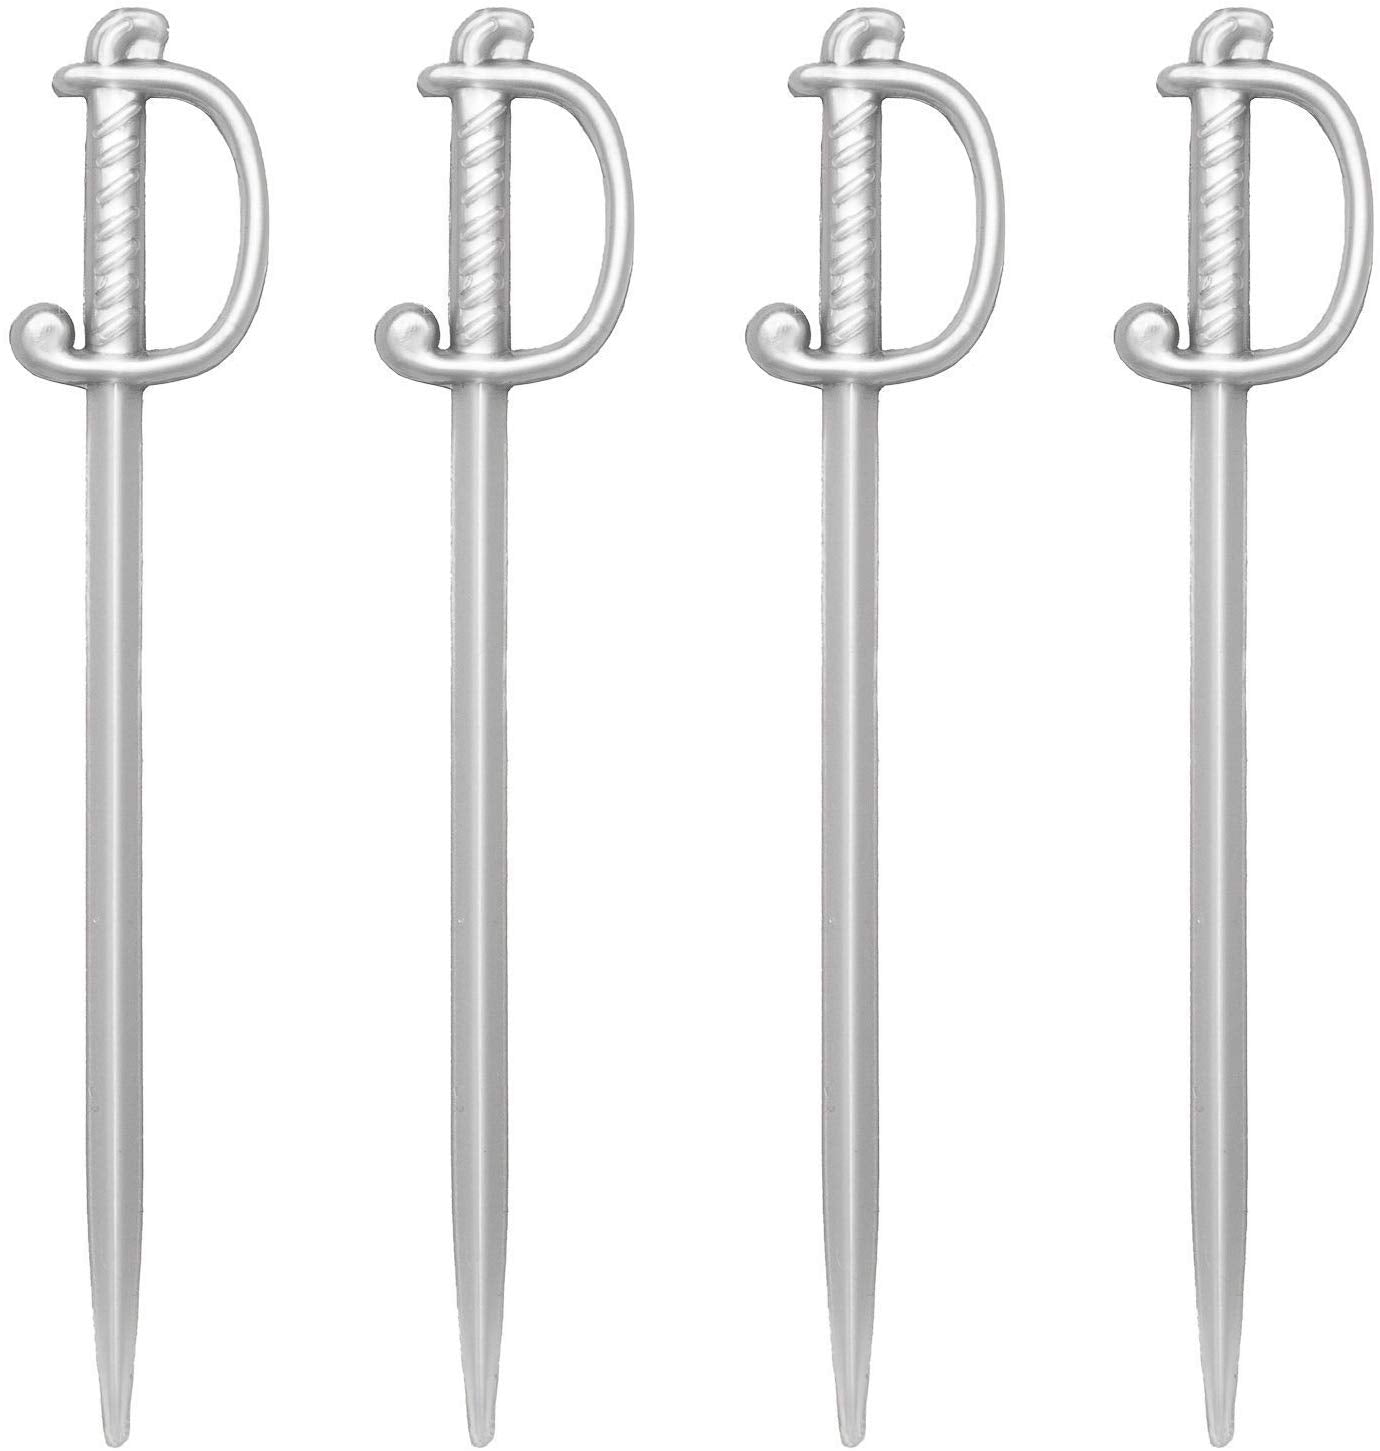 Silver Sword Cocktail and Food Picks - oddgifts.com